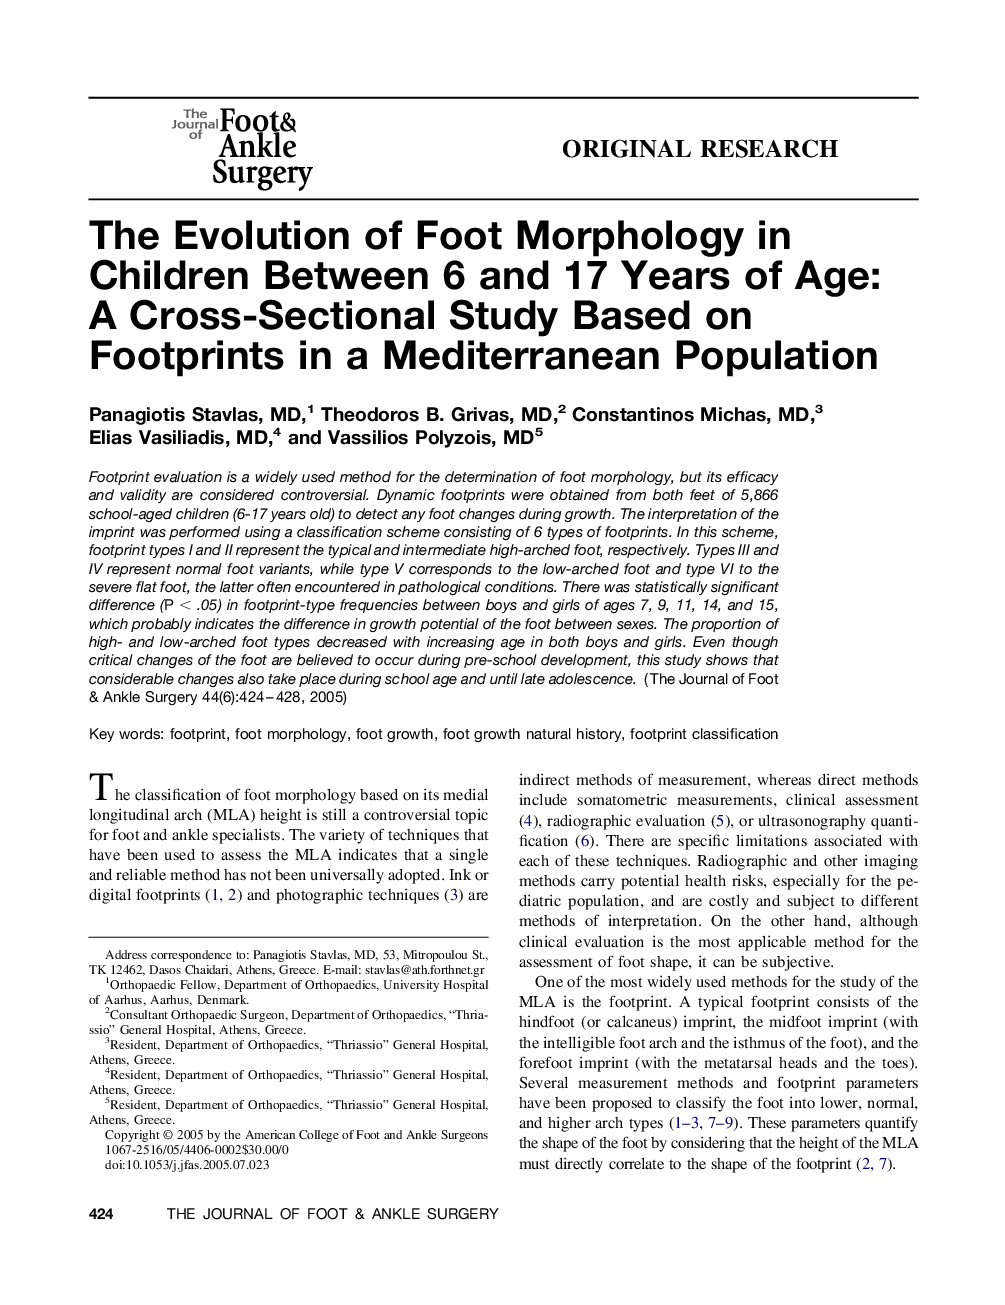 The Evolution of Foot Morphology in Children Between 6 and 17 Years of Age: A Cross-Sectional Study Based on Footprints in a Mediterranean Population